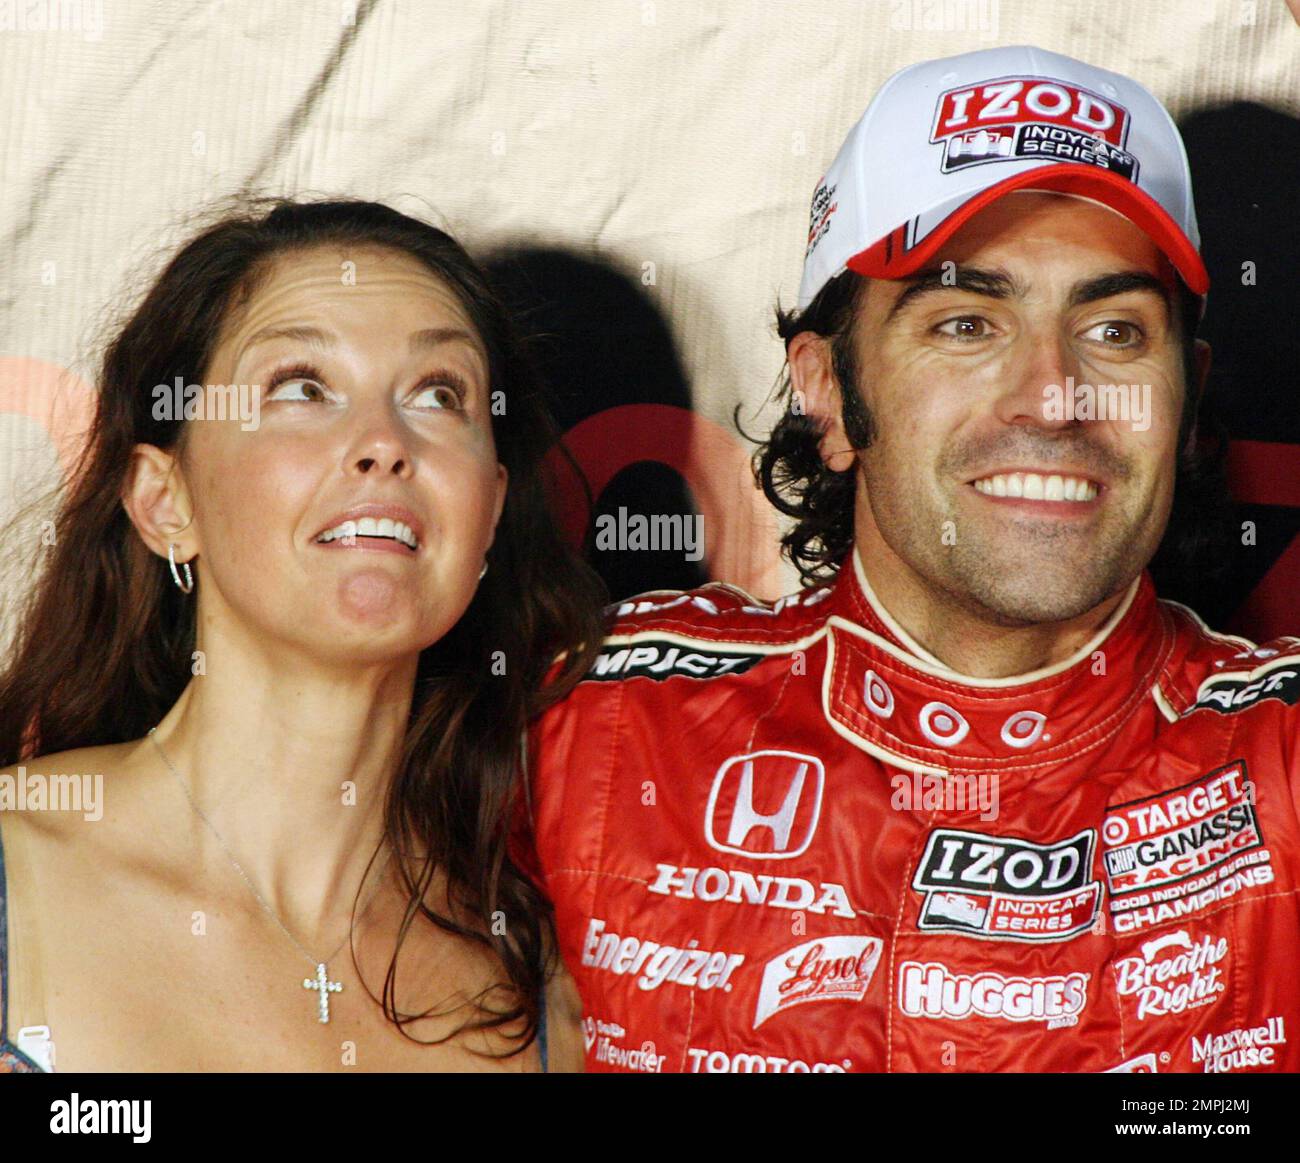 https://c8.alamy.com/comp/2MPJ2MJ/indy-racing-league-driver-dario-franchitti-and-extremely-happy-looking-wife-actress-ashley-judd-celebrate-his-izod-indycar-series-title-championship-after-the-cafe-do-brasil-indy-300-held-at-the-homestead-miami-speedway-homestead-fl-100210-2MPJ2MJ.jpg